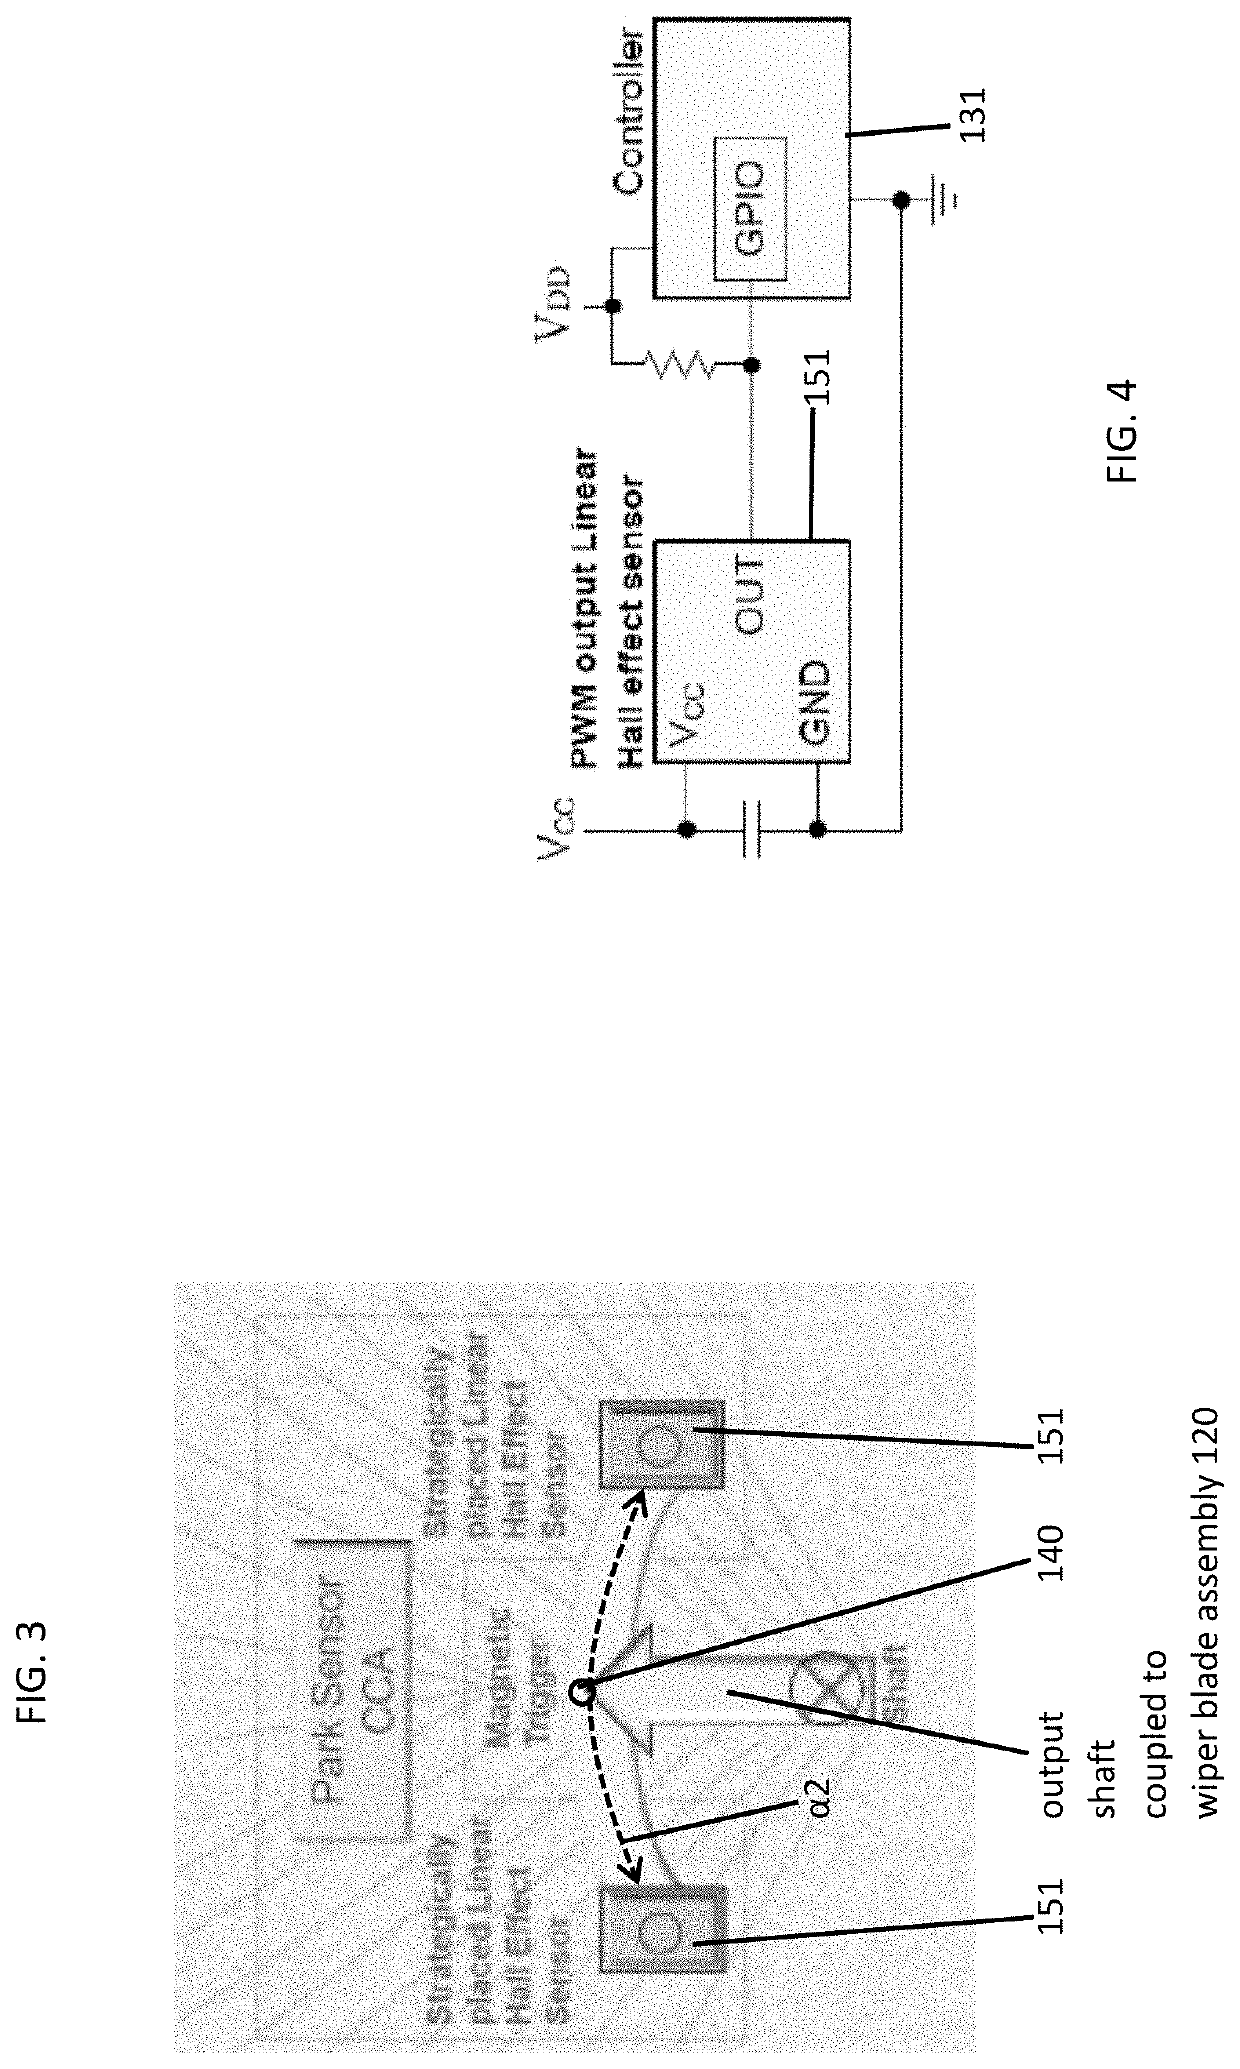 Dynamic sweep angle measurement for fault monitoring of windshield wiper systems